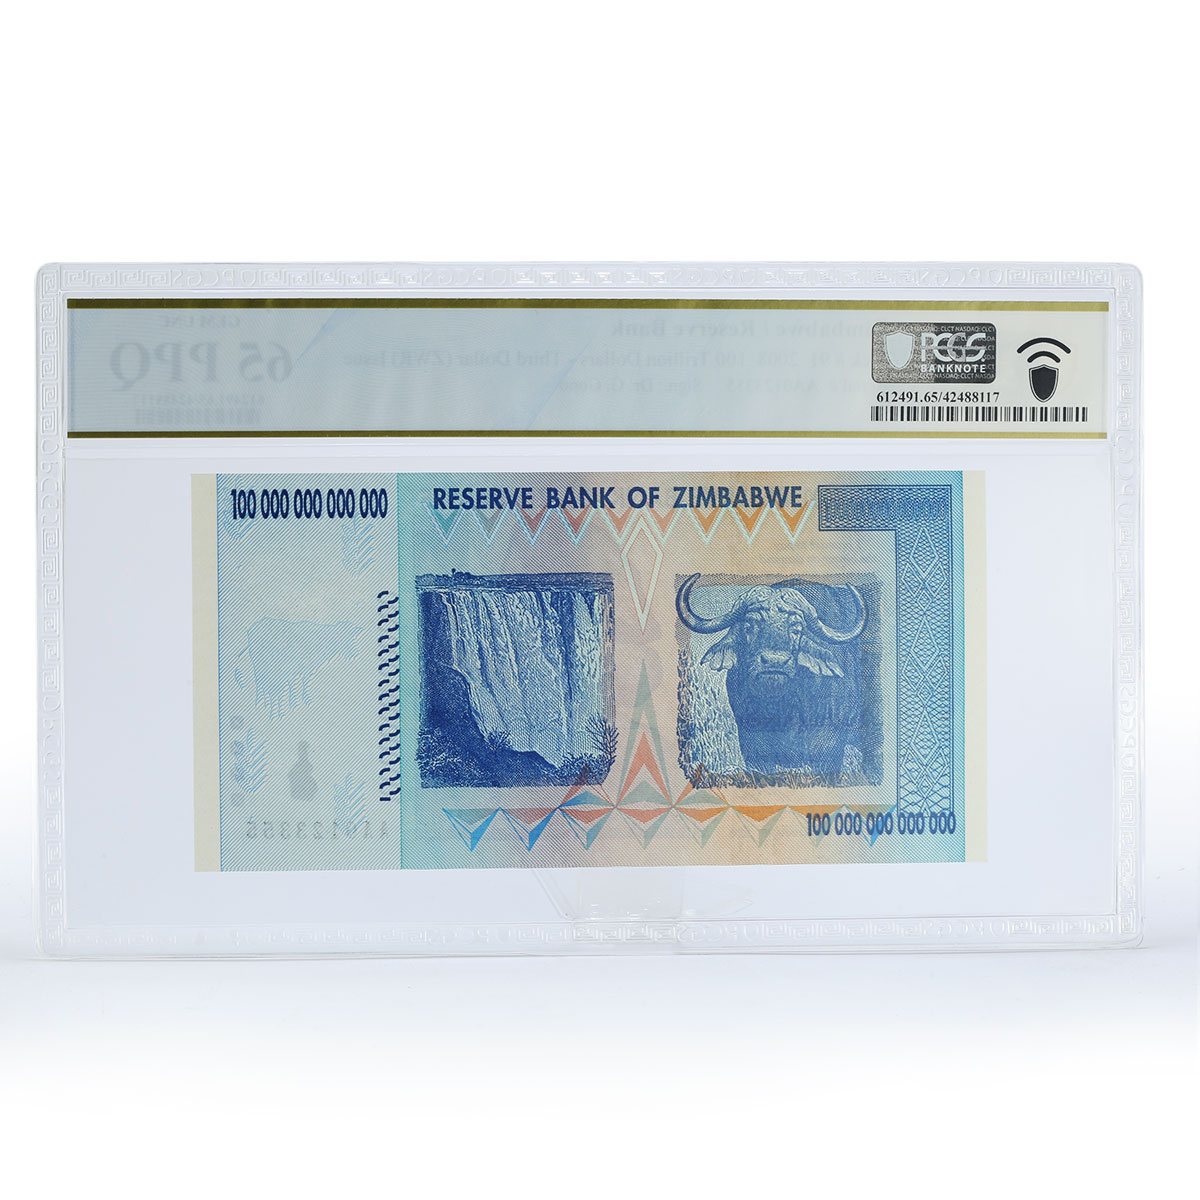 ZIMBABWE 100 TRILLION DOLLARS BANKNOTE CURRENCY PPQ65 PCGS UNCIRCULATED 2008